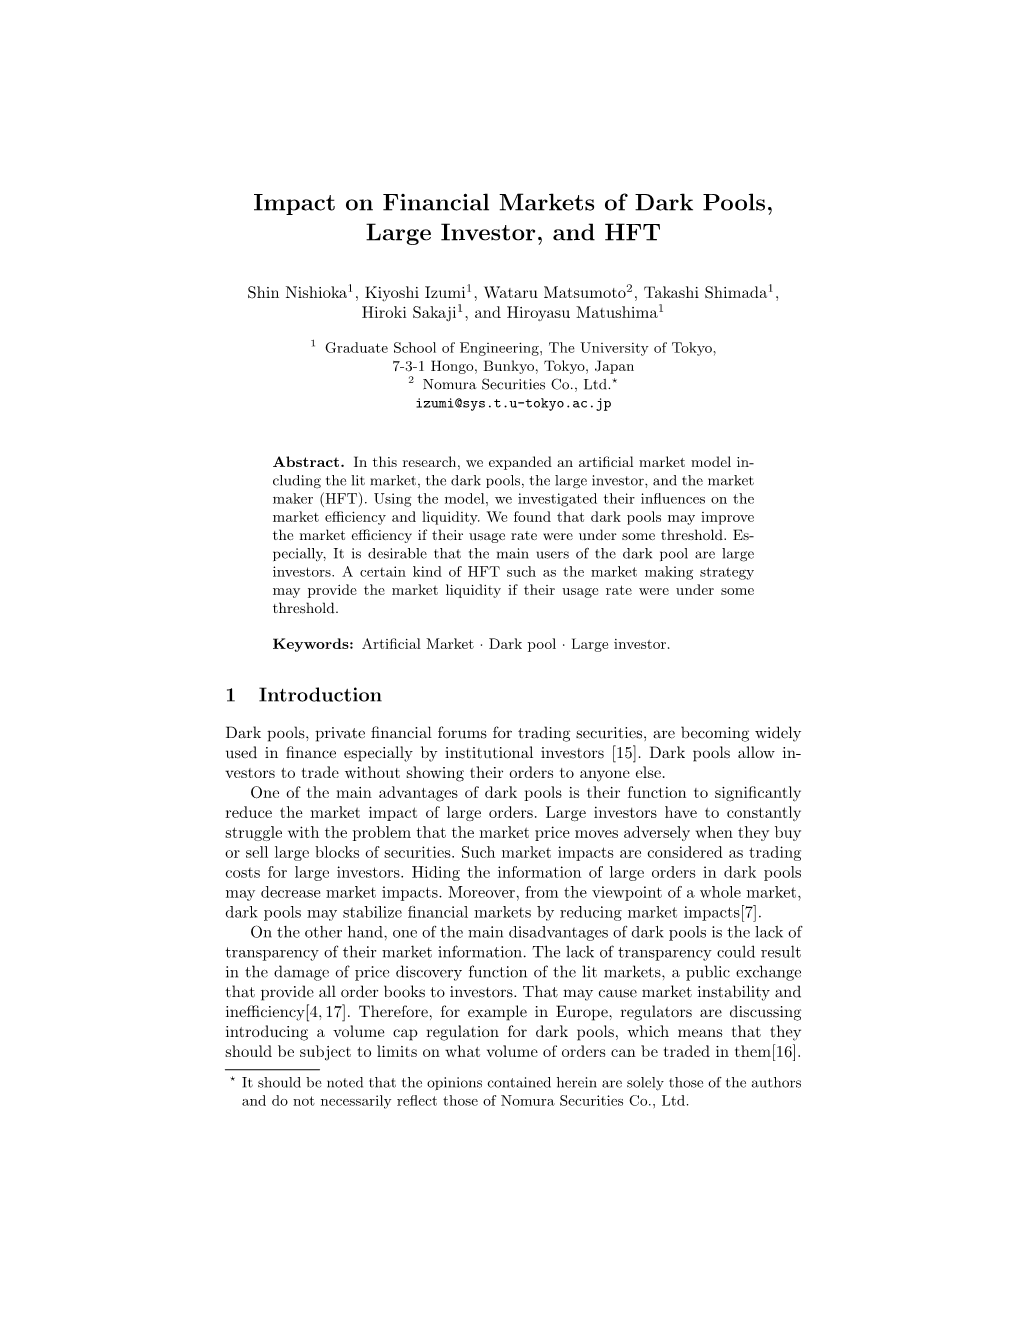 Impact on Financial Markets of Dark Pools, Large Investor, and HFT